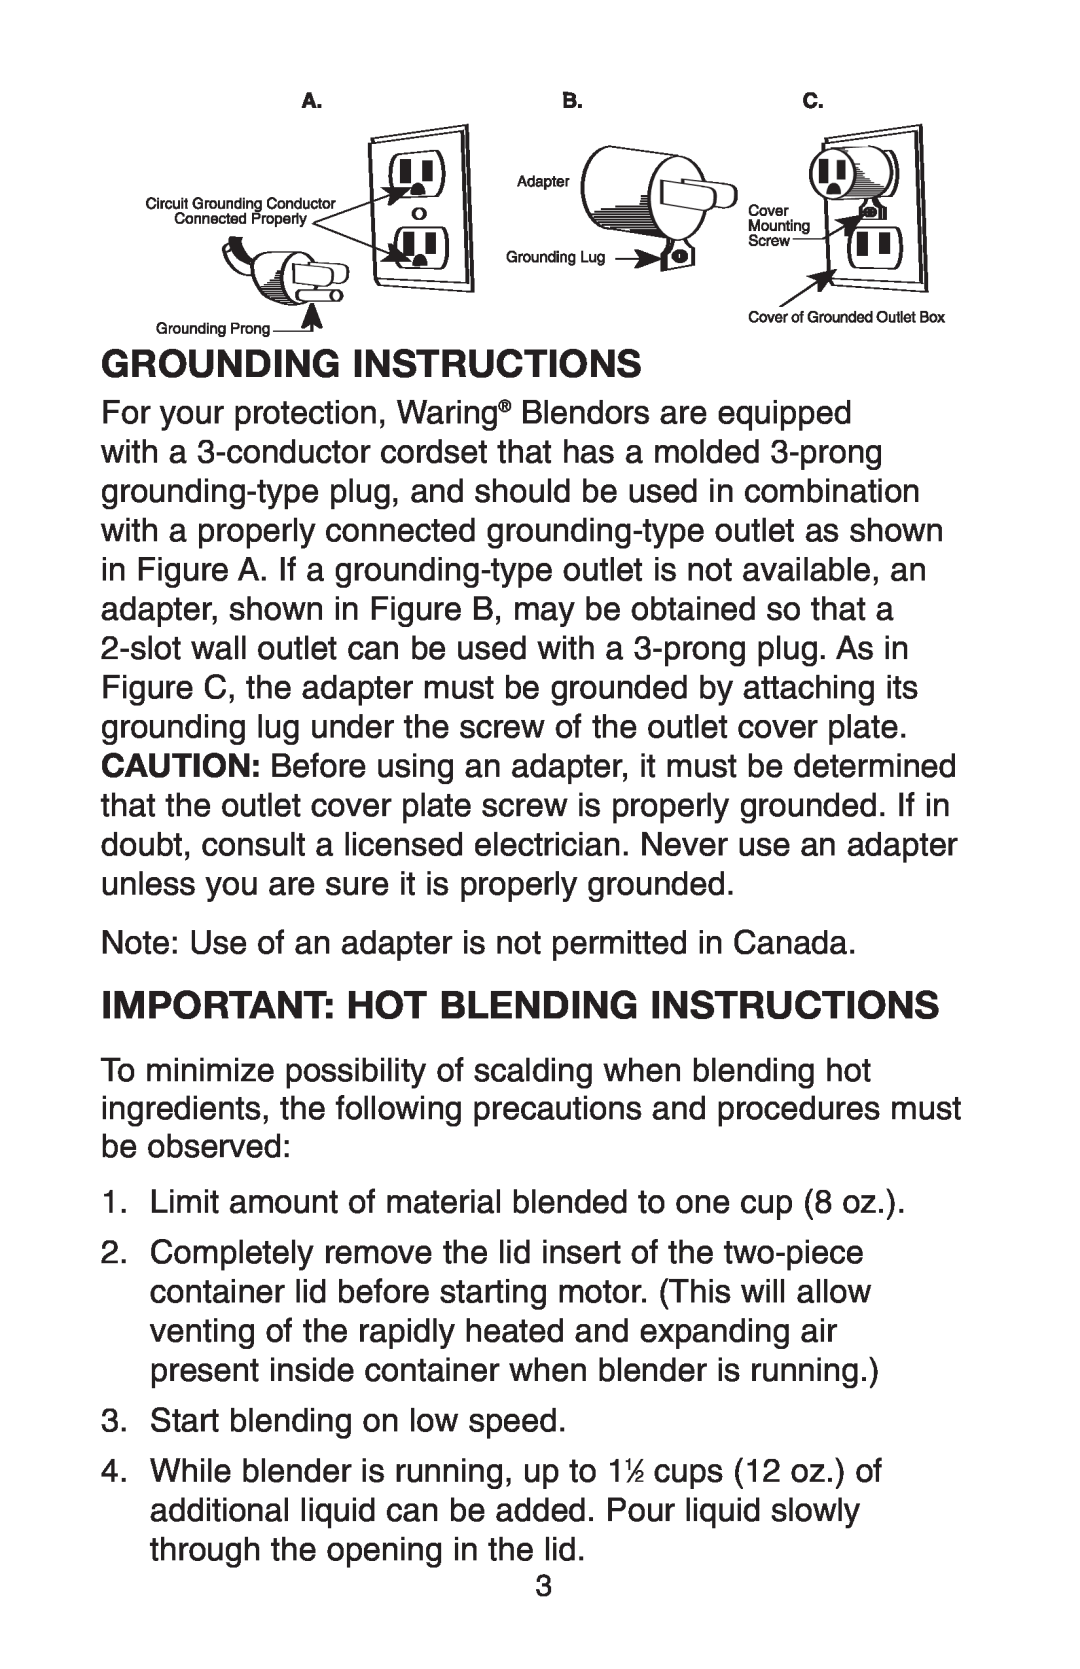 Conair RB70 manual Grounding Instructions, Important Hot Blending Instructions 